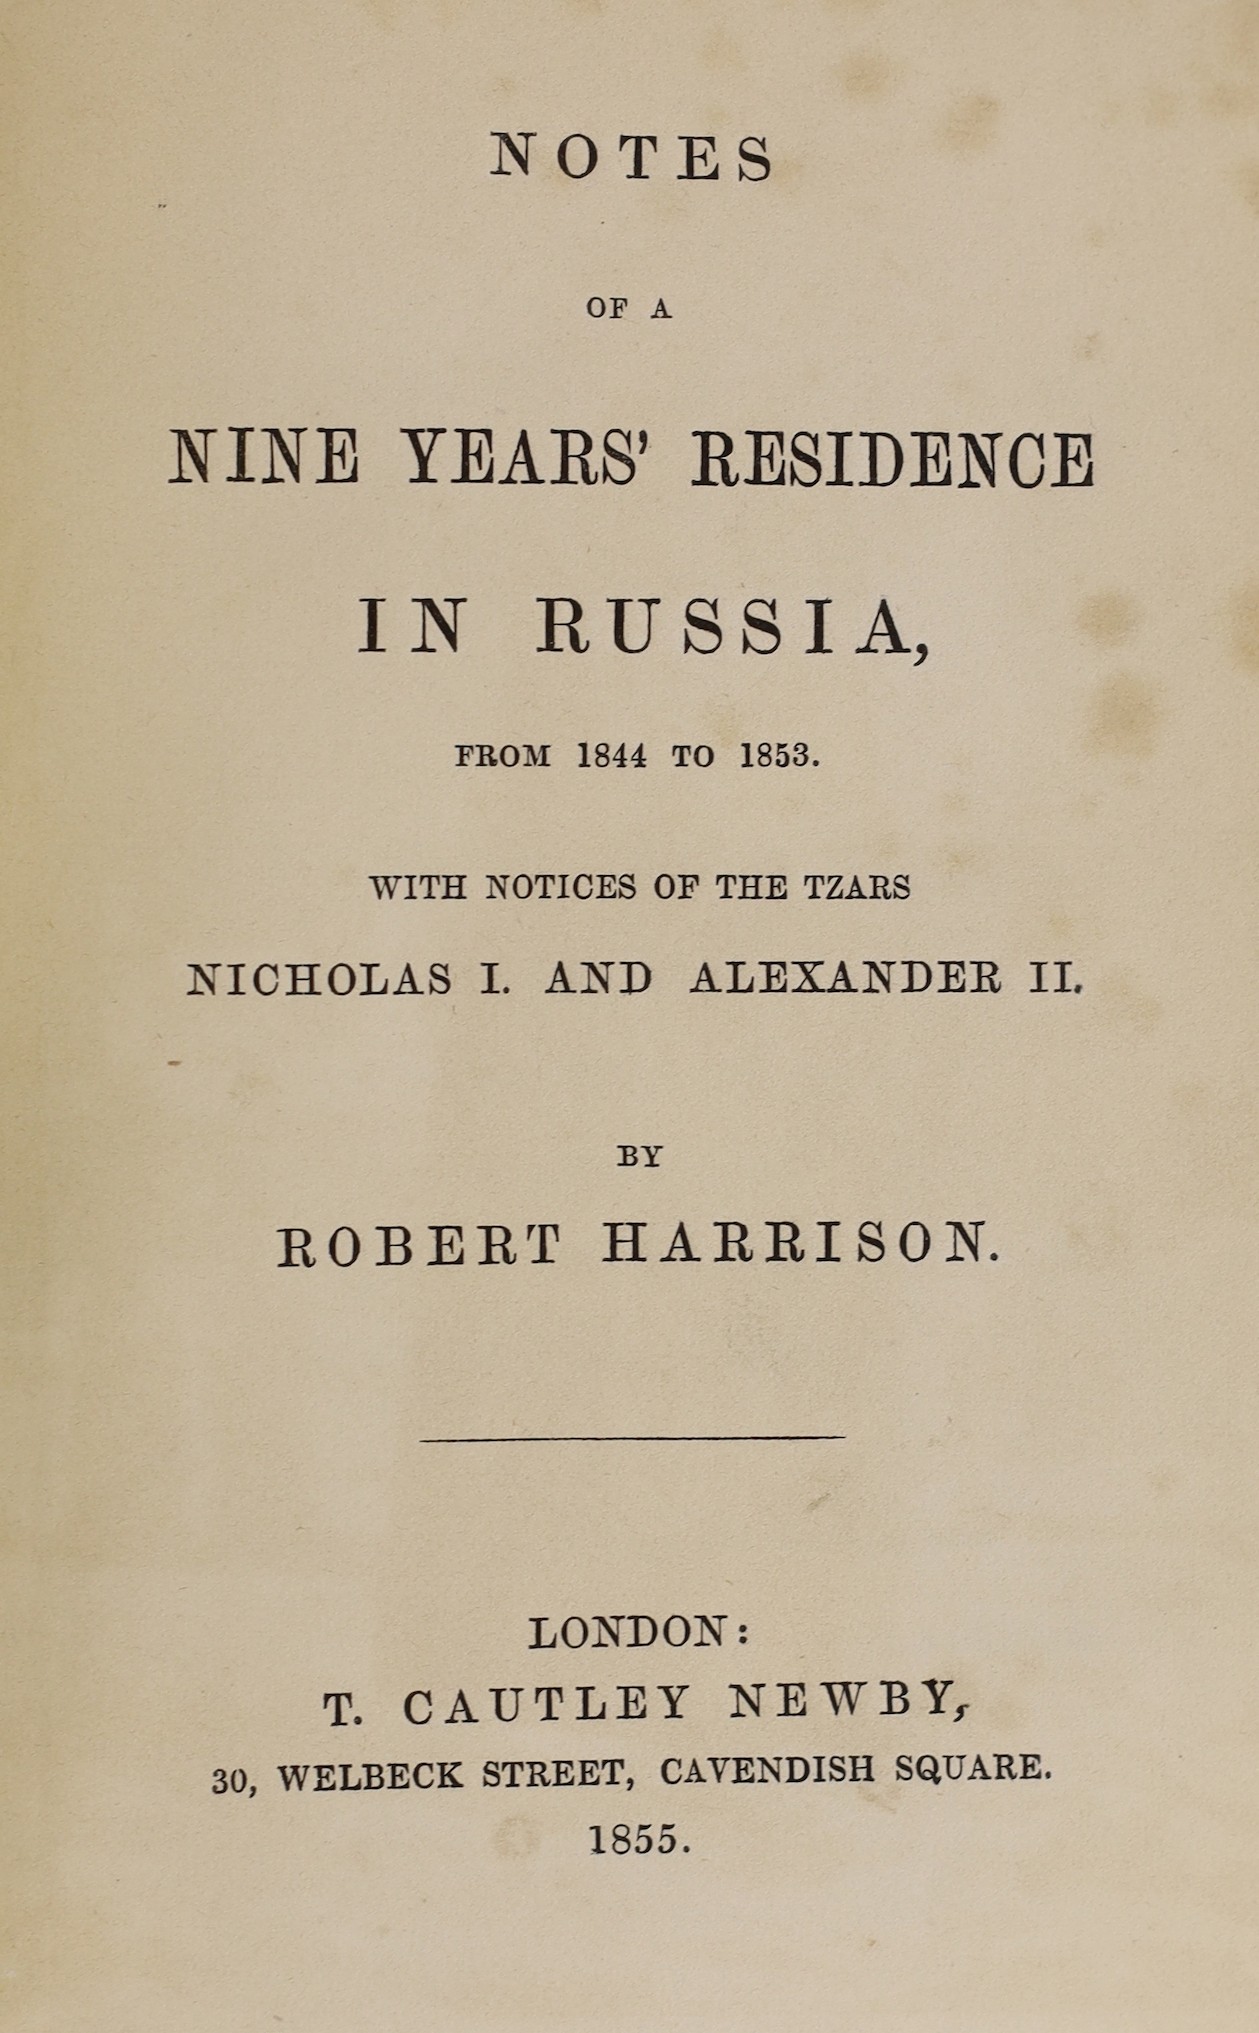 Harrison, Robert - Notes of a Nine Years’ Residence in Russia, from 1844-1853, with Notices of the Tzars Nicholas l and Alexander ll, 8vo, original green cloth gilt, with 4 chromolithograph plates, including frontis, p.1